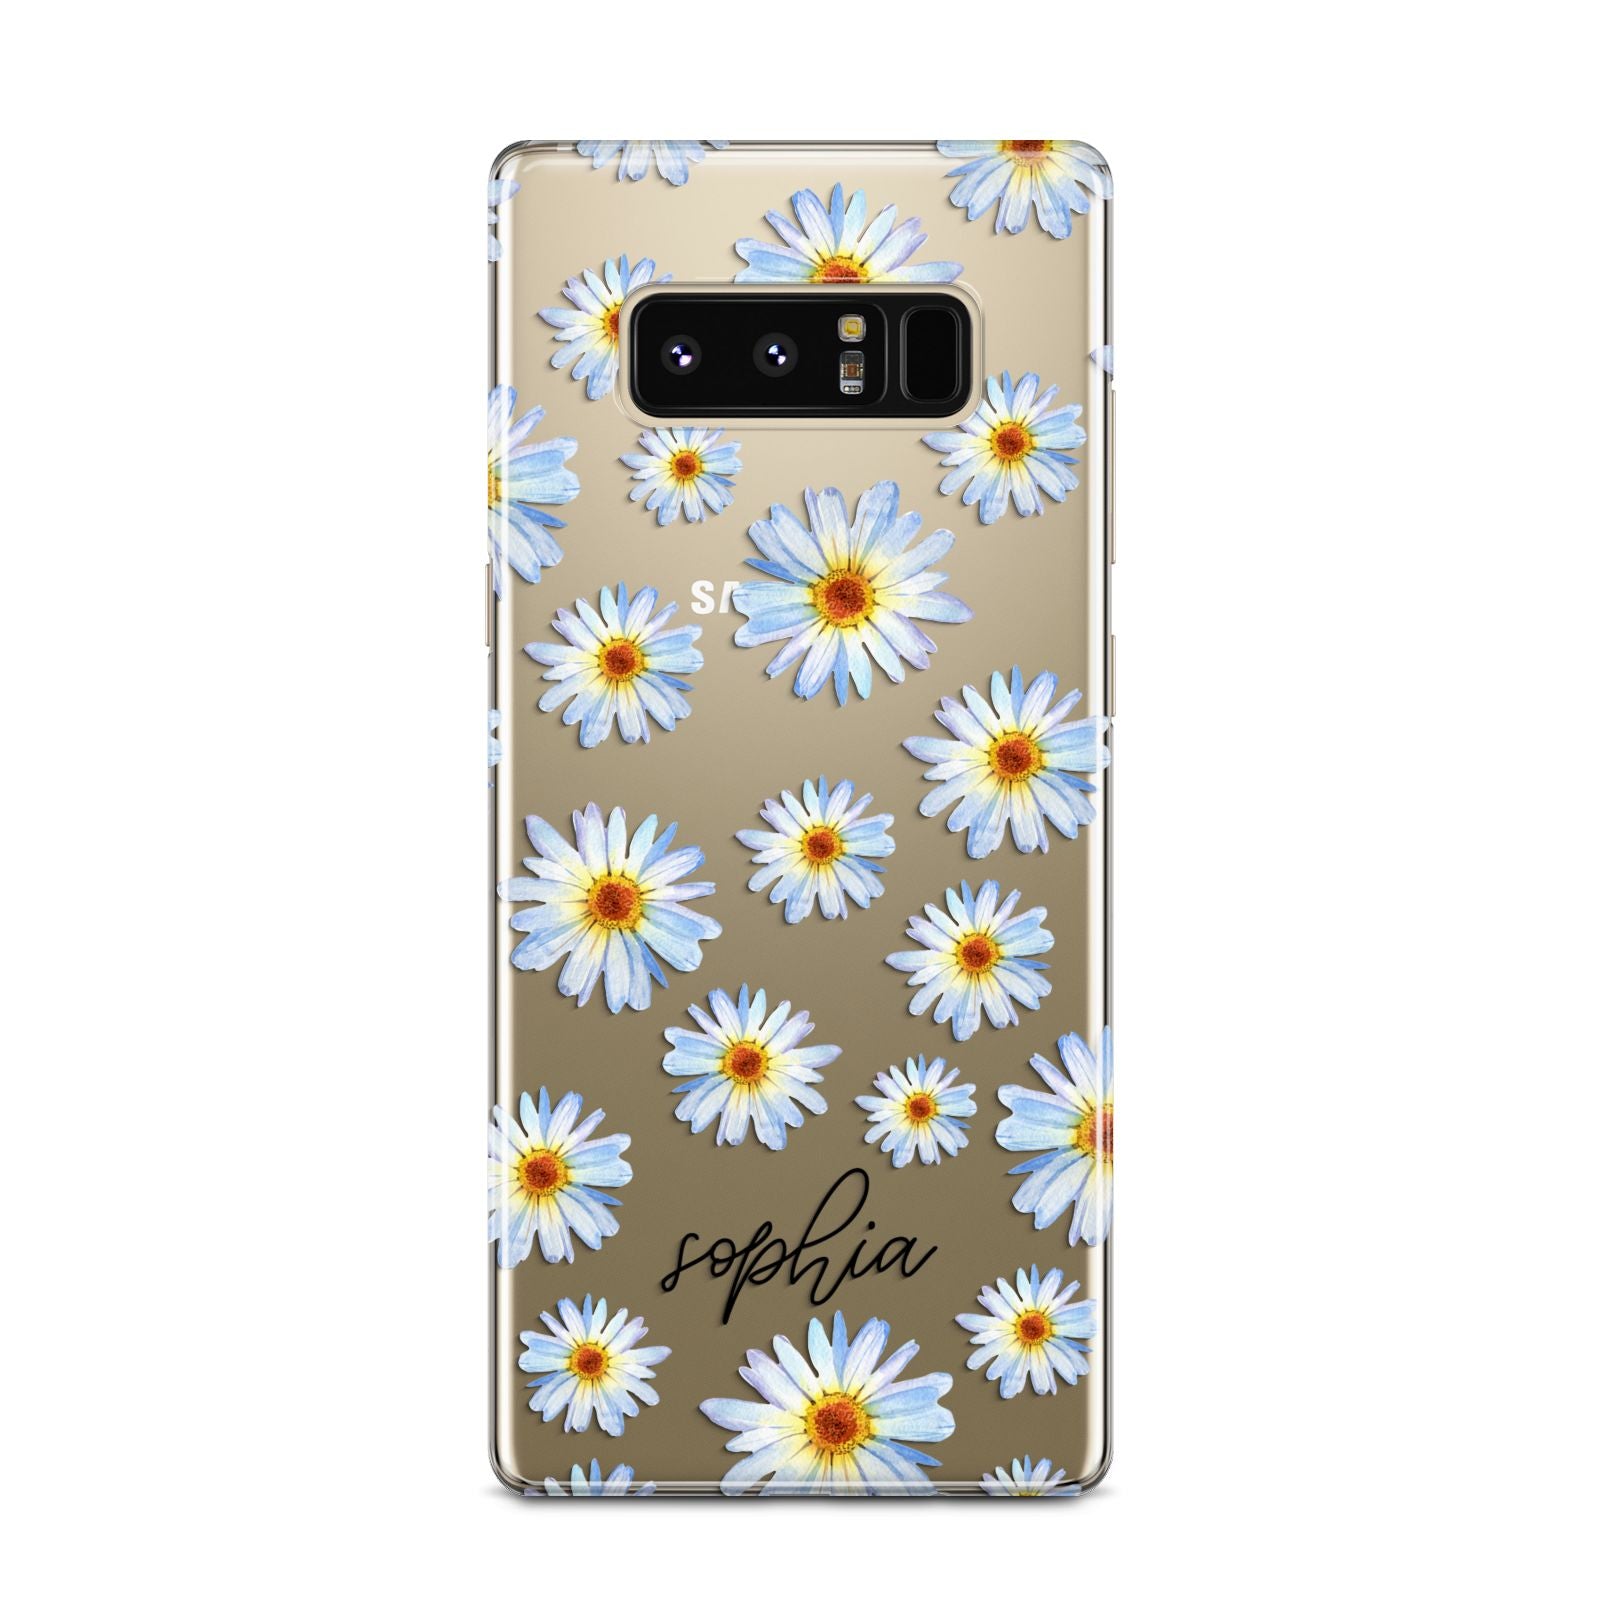 Personalised Daisy Samsung Galaxy Note 8 Case